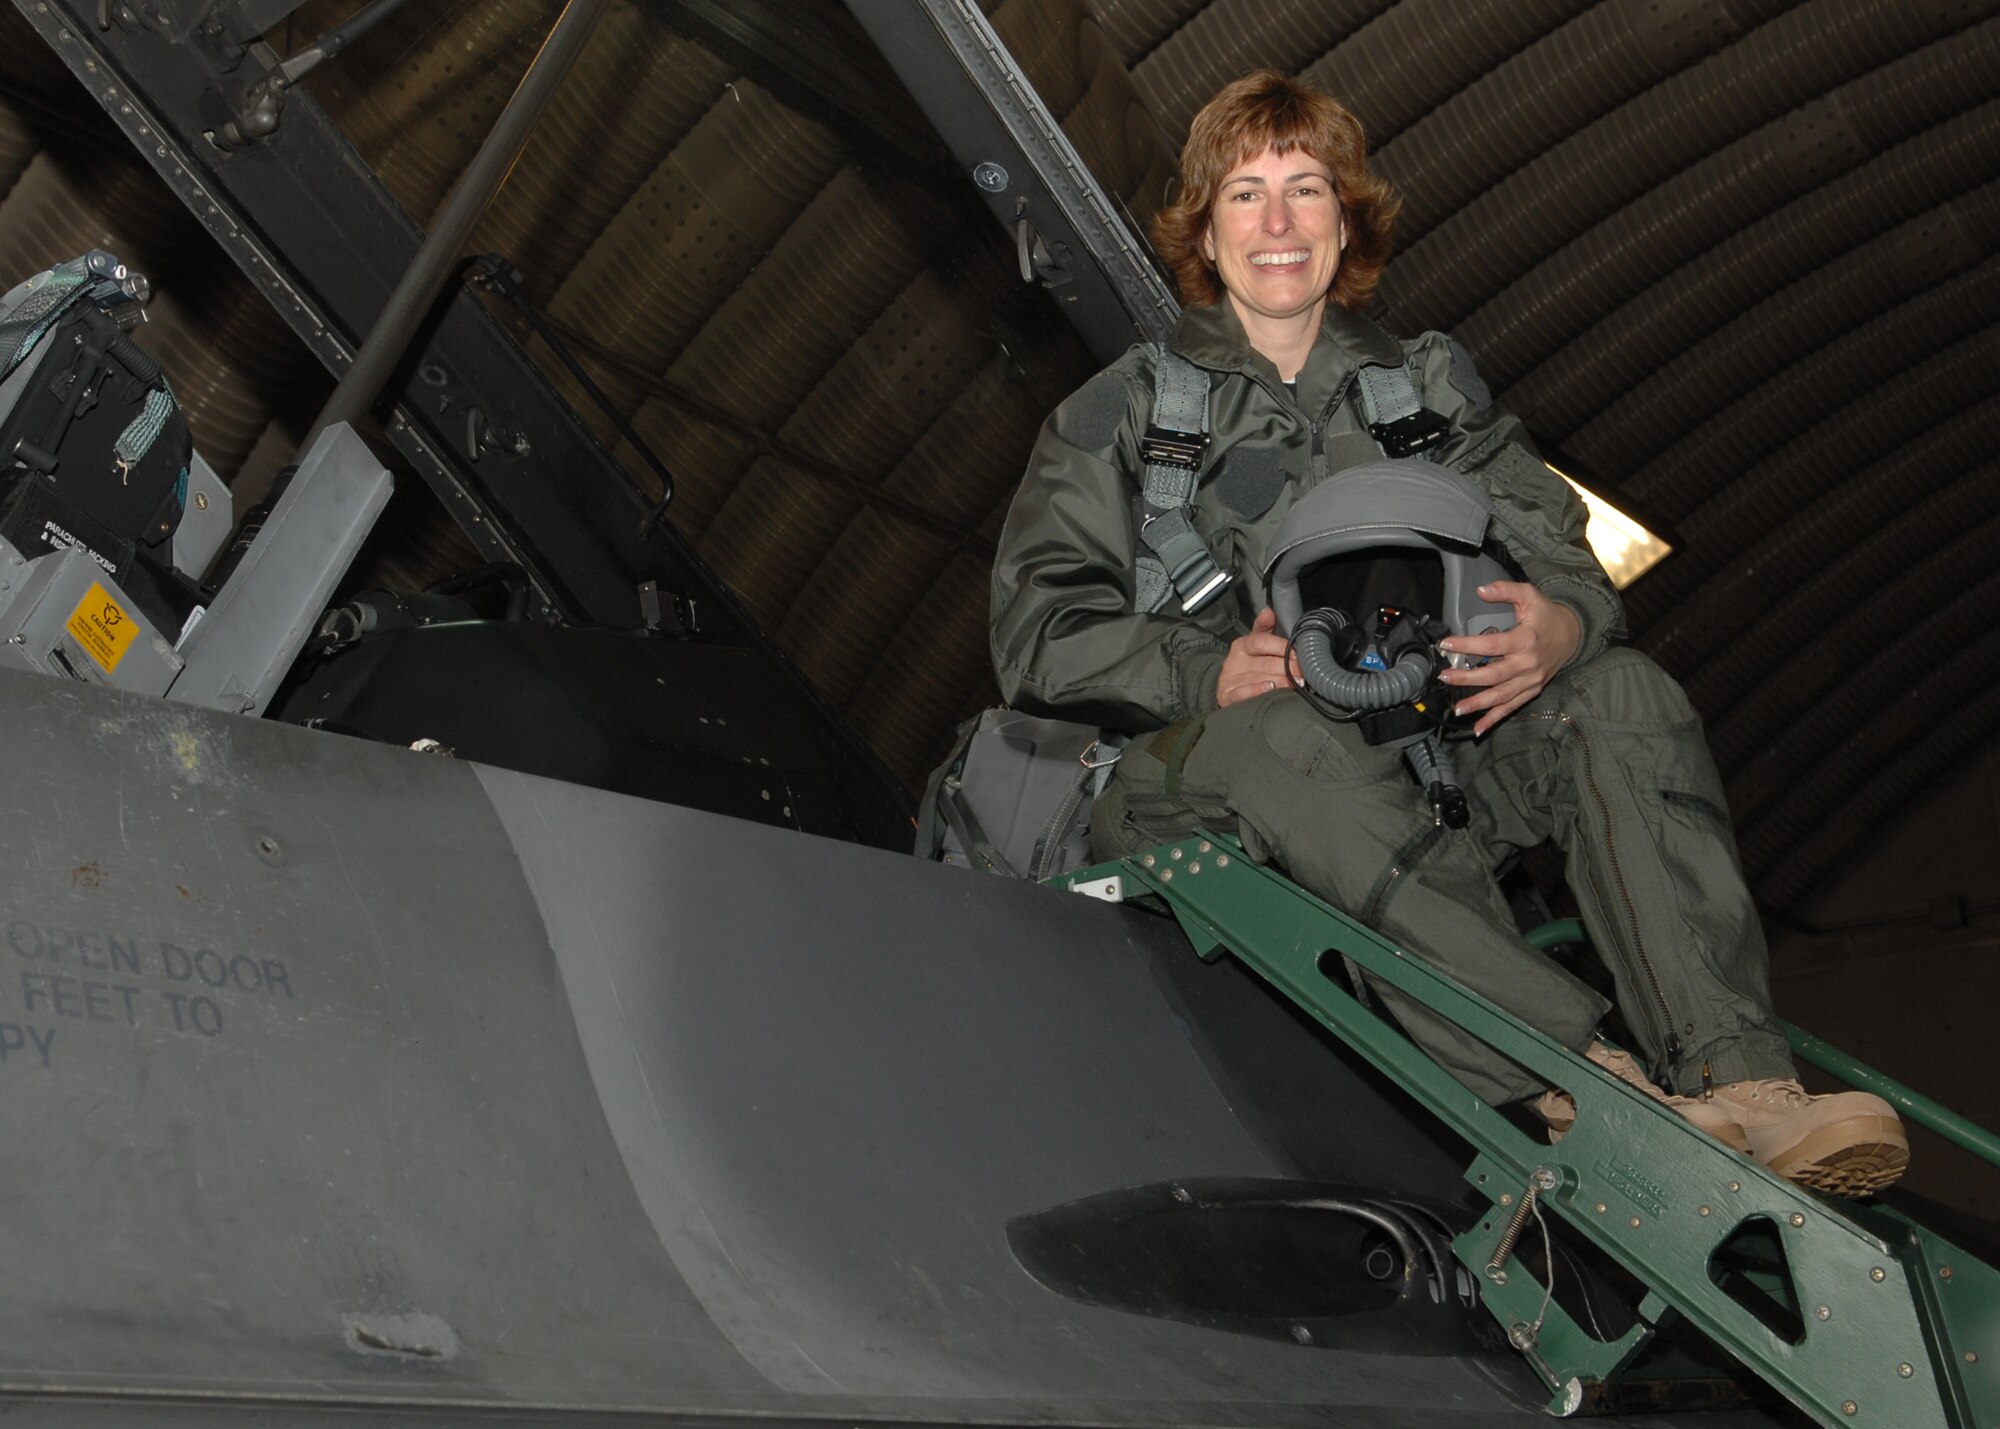 SPANGDAHLEM AIR BASE, Germany – Col. Julie Robel., 3 rd Air Force Mission Support Squadron, prepares to take an incentive flight Oct. 30, 2008. Col Robel earned her incentive flight for her selection as best Mission Support Squadron in the Air Force. (U.S. Air Force photo by Airman 1st Class Allen Pollard)